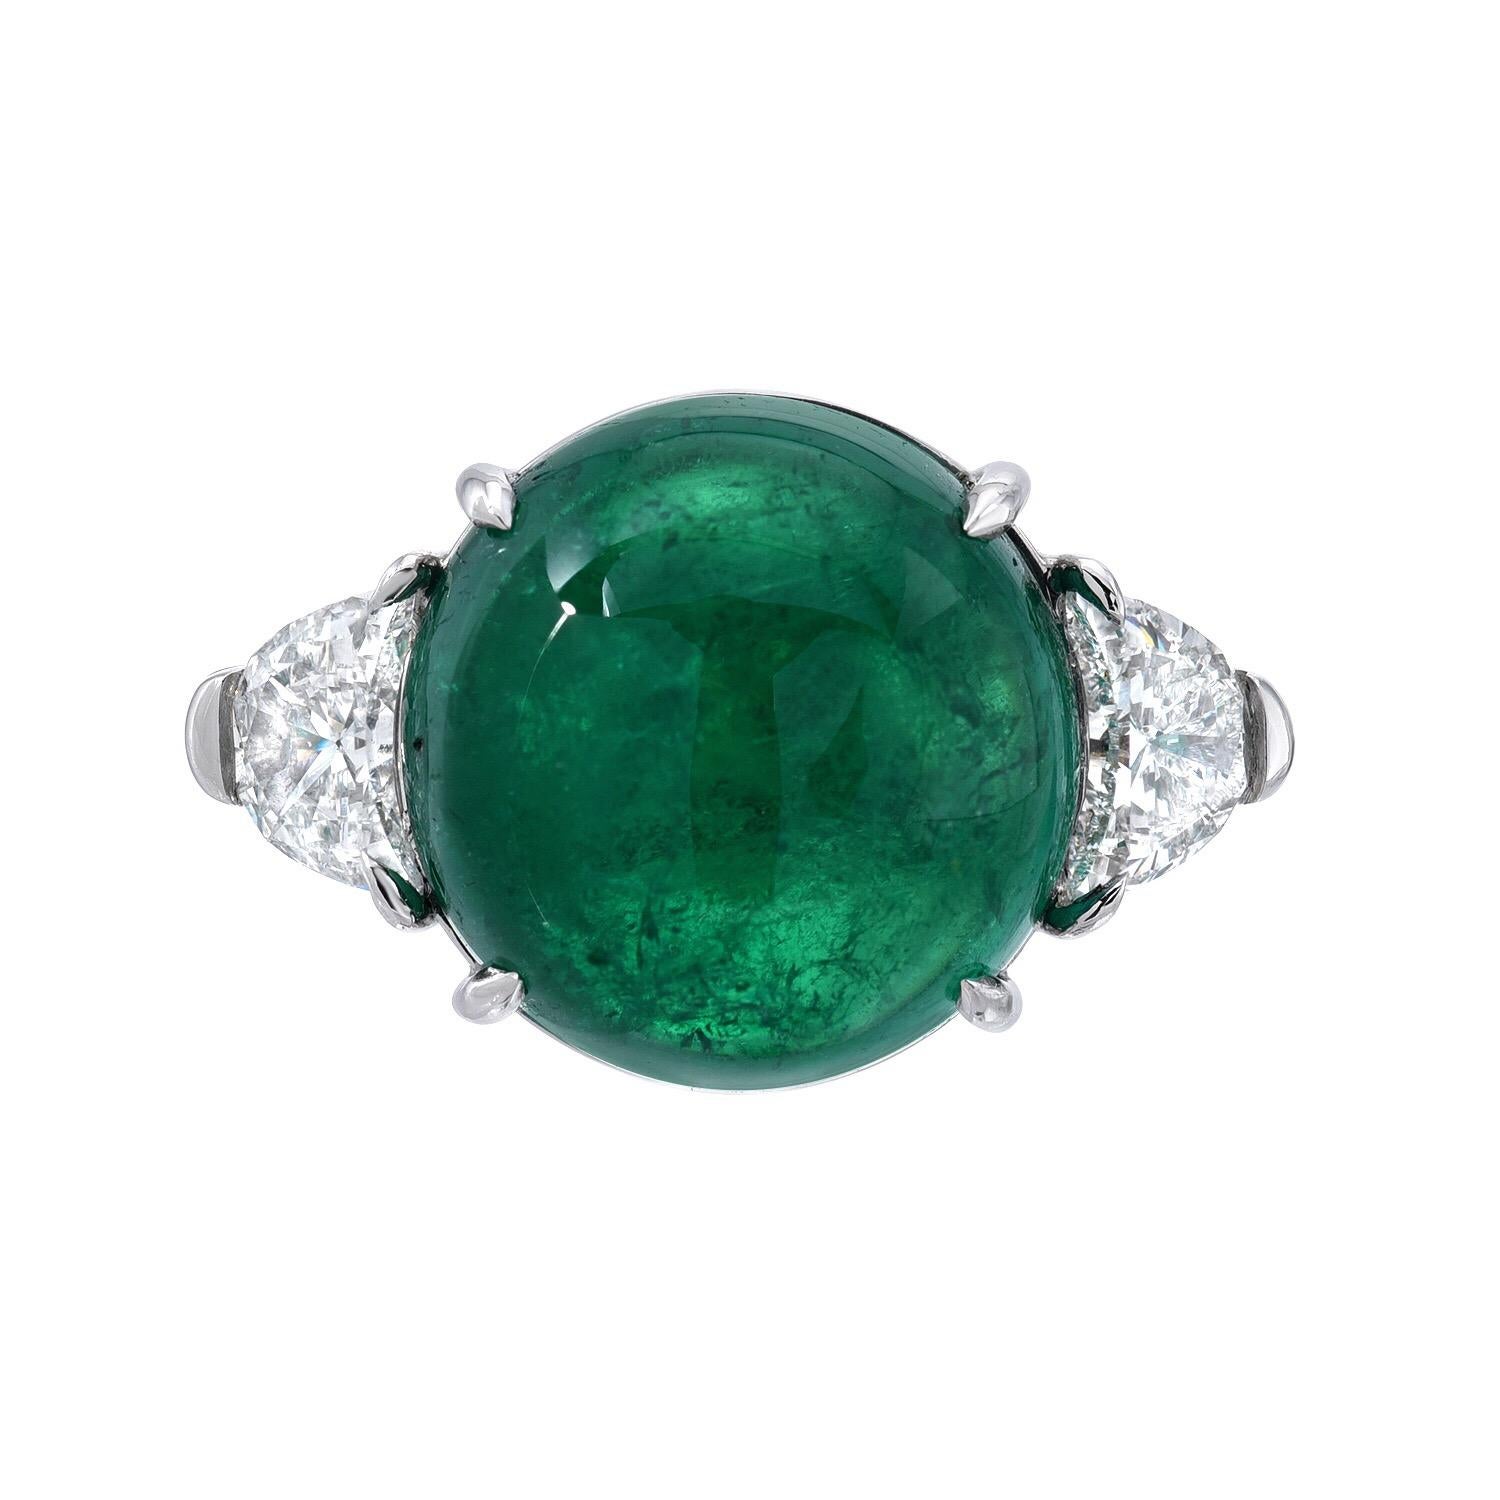 Colombian Emerald cabochon weighing a total of 7.67 carats and a total of 0.73 carats crescent shaped diamonds, E/VS, are set in this spectacular three stone platinum ring.
Size 6. Re-sizing is complimentary upon request.
Signed Merkaba.